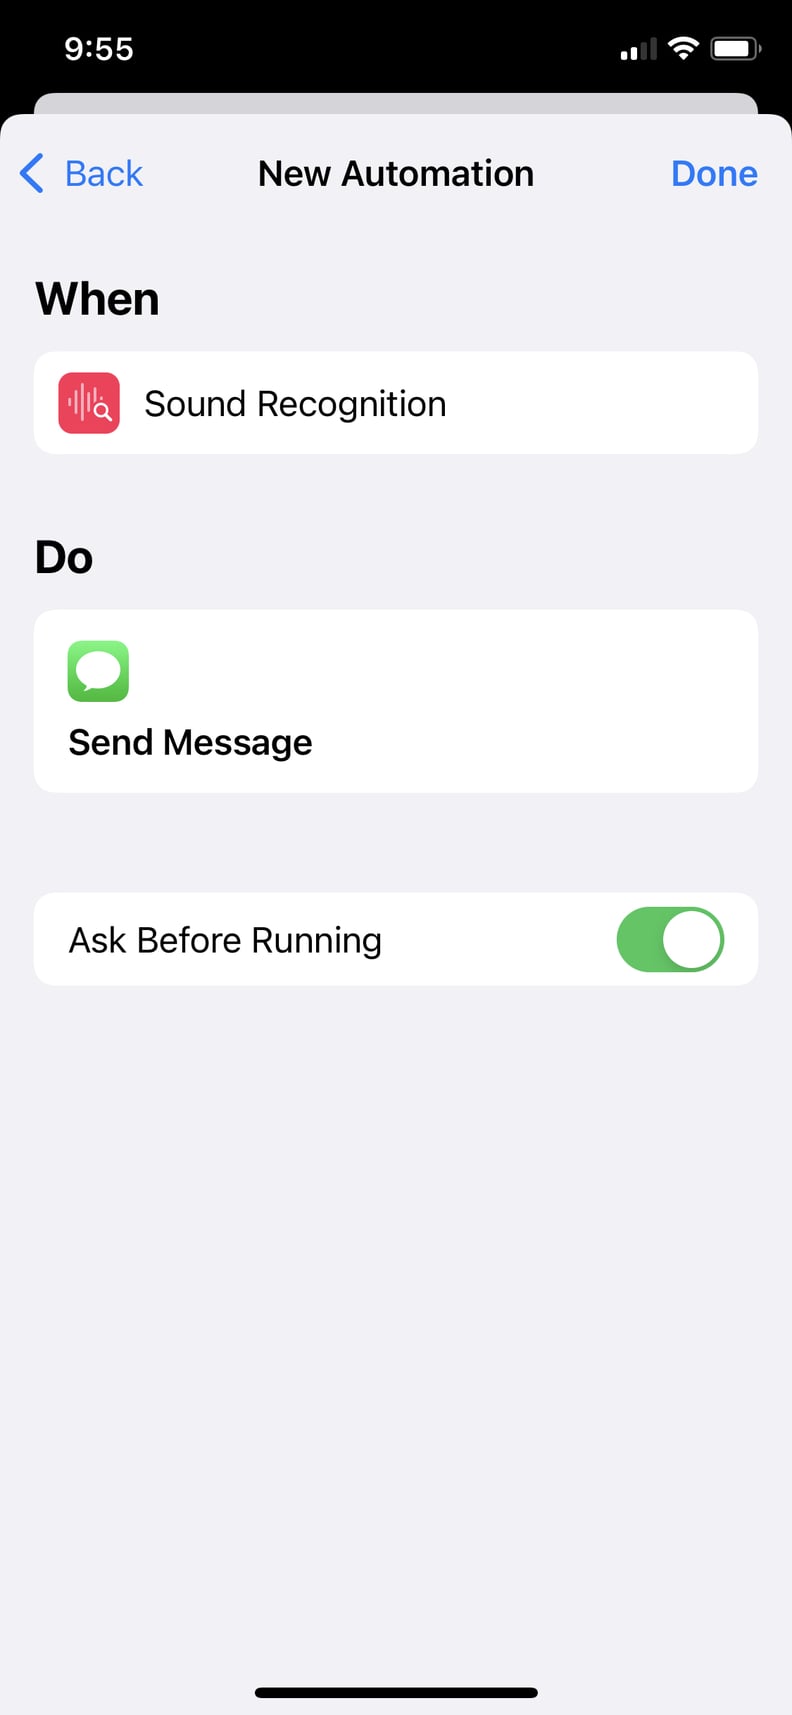 Select "Next" and Make Sure the Message, Call, or Other Command Is Set Up Properly